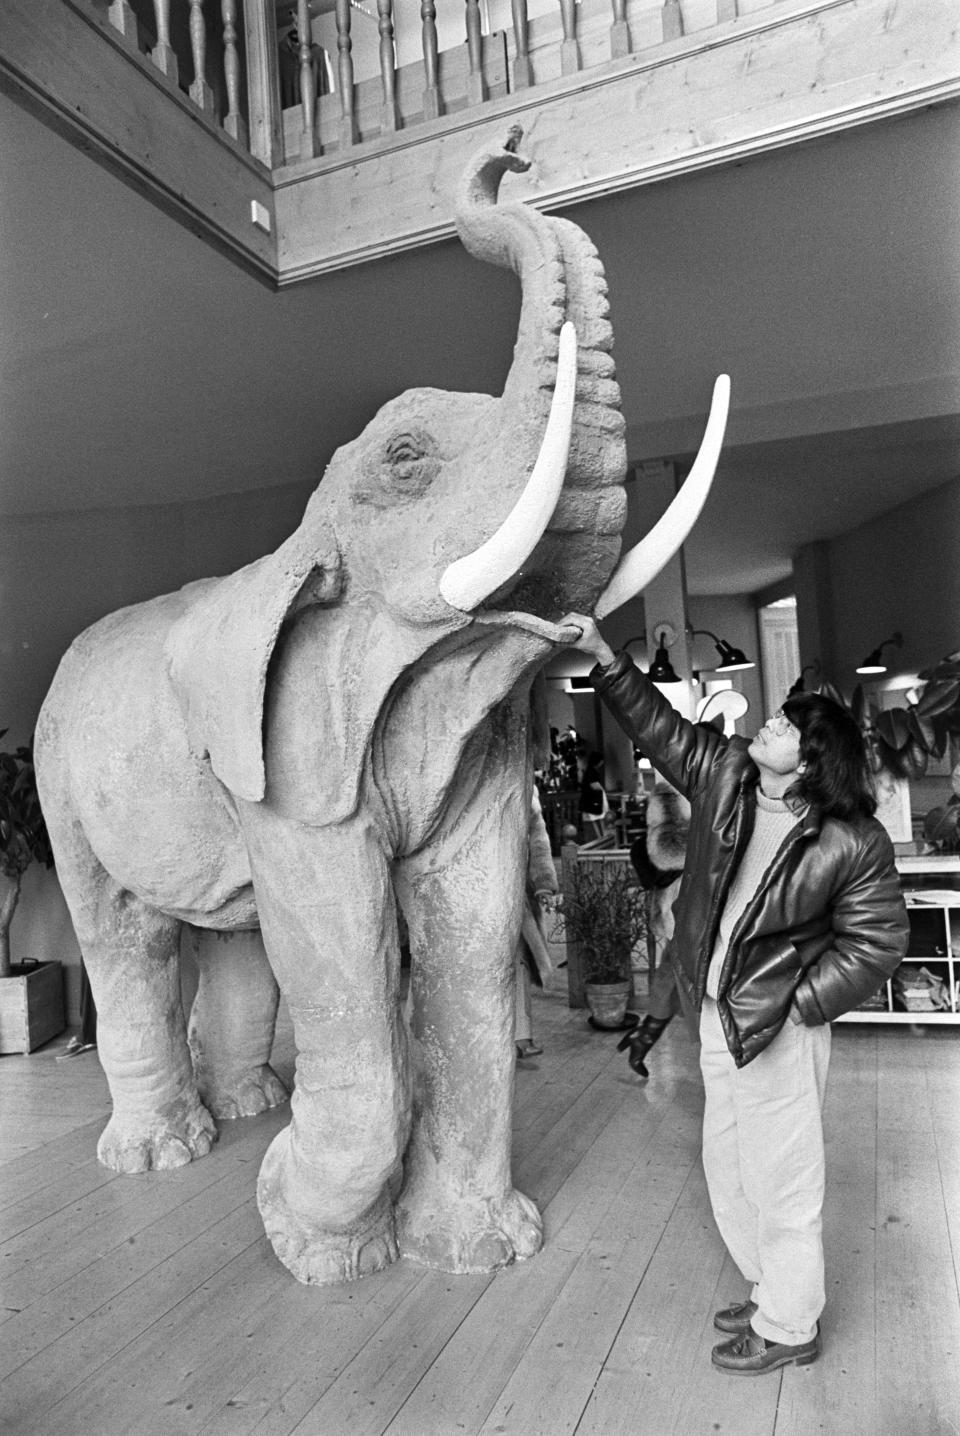 Designer Kenzo Takada poses with a sculpture of an elephant in Paris, France, on February 10, 1978. (Photo by Guy Marineau/WWD/Penske Media via Getty Images)